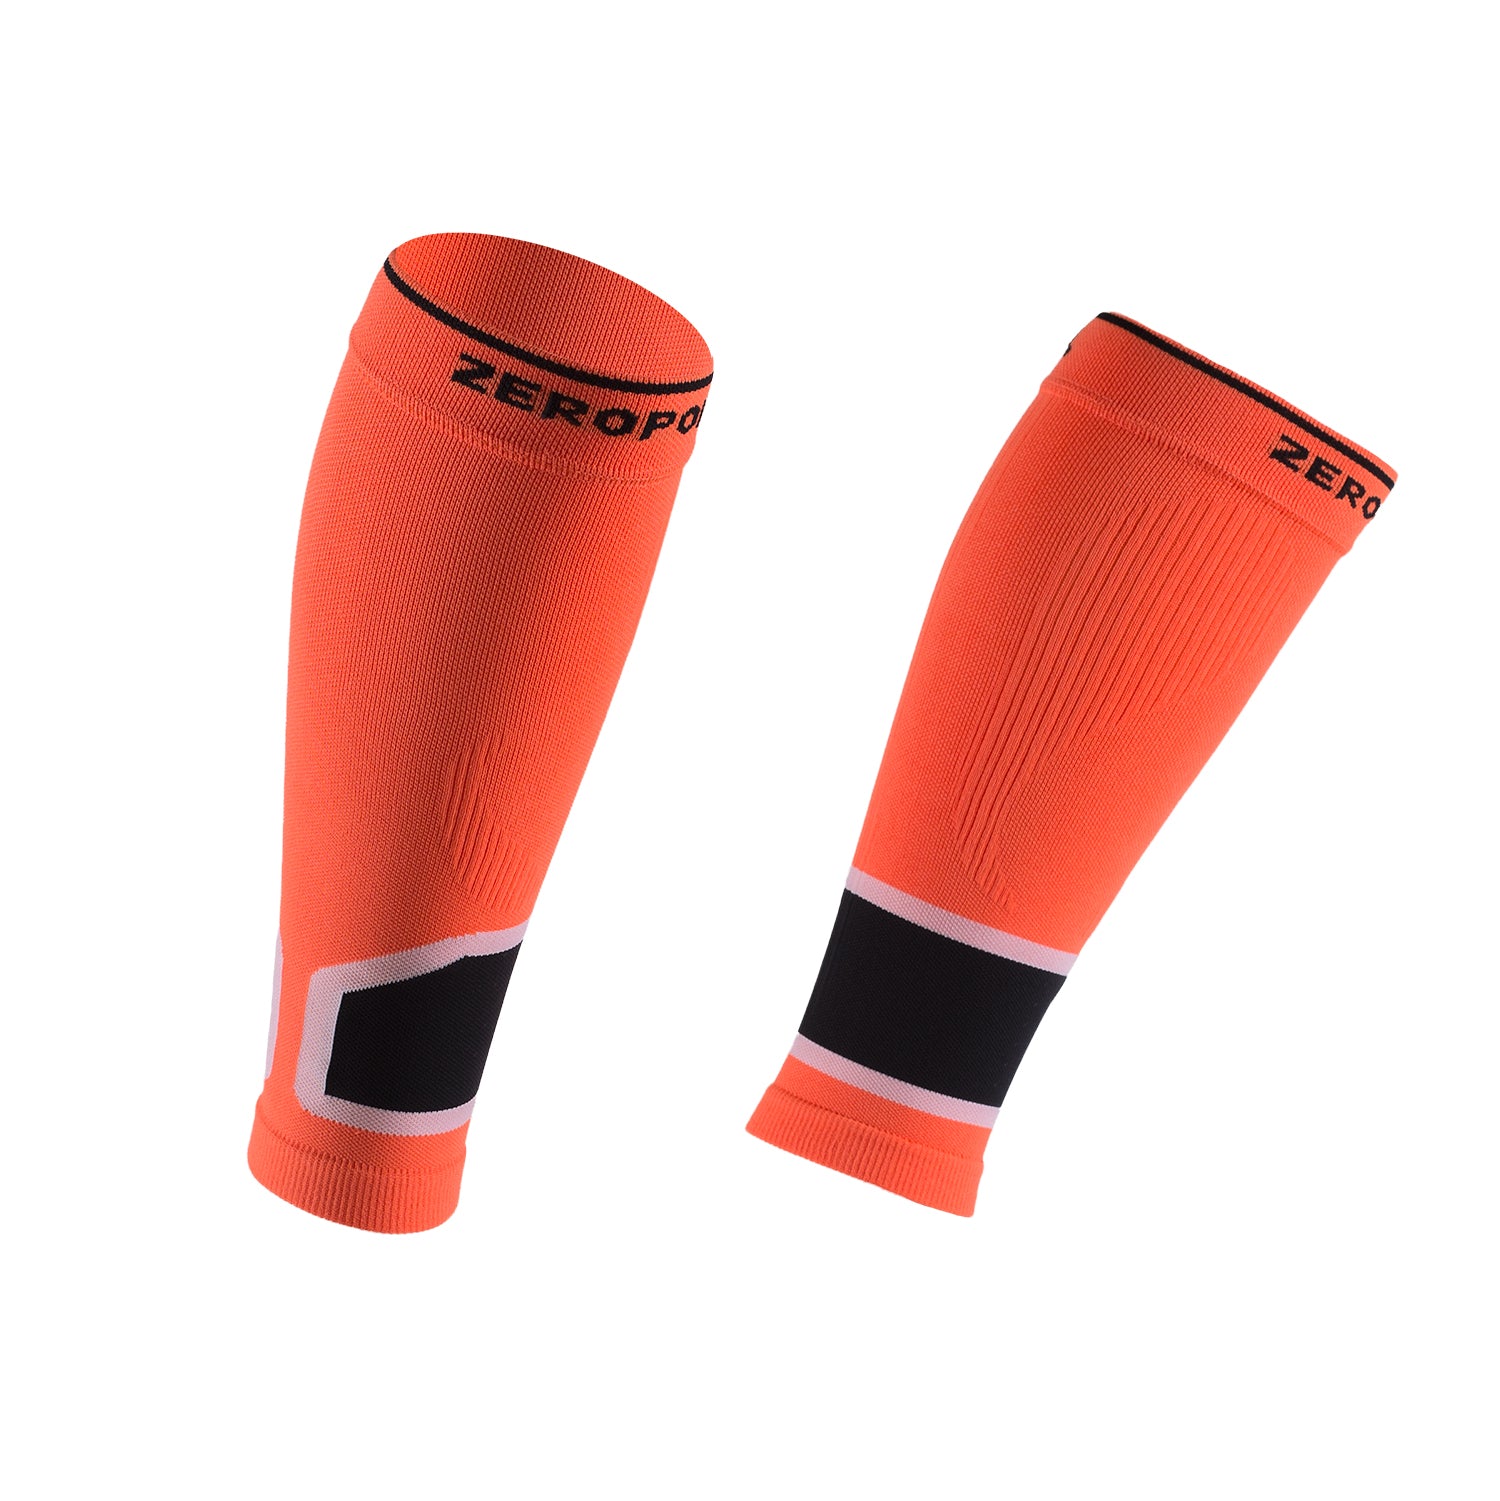 Pro Racing High Compression Calf Sleeves, Black/Grey - Zeropoint